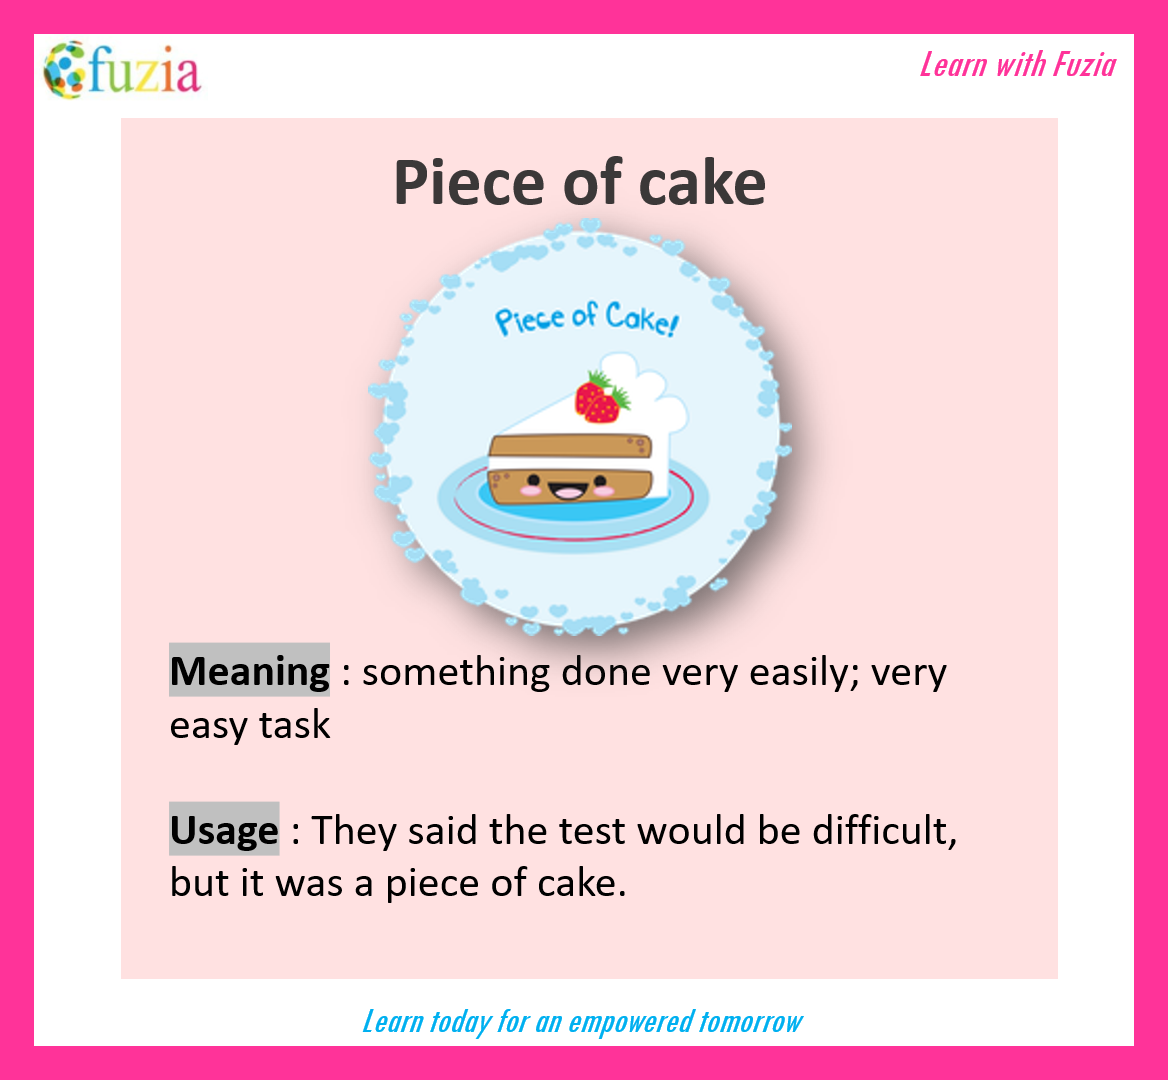 Idioms Game | Figurative Language Review Activity - Appletastic Learning